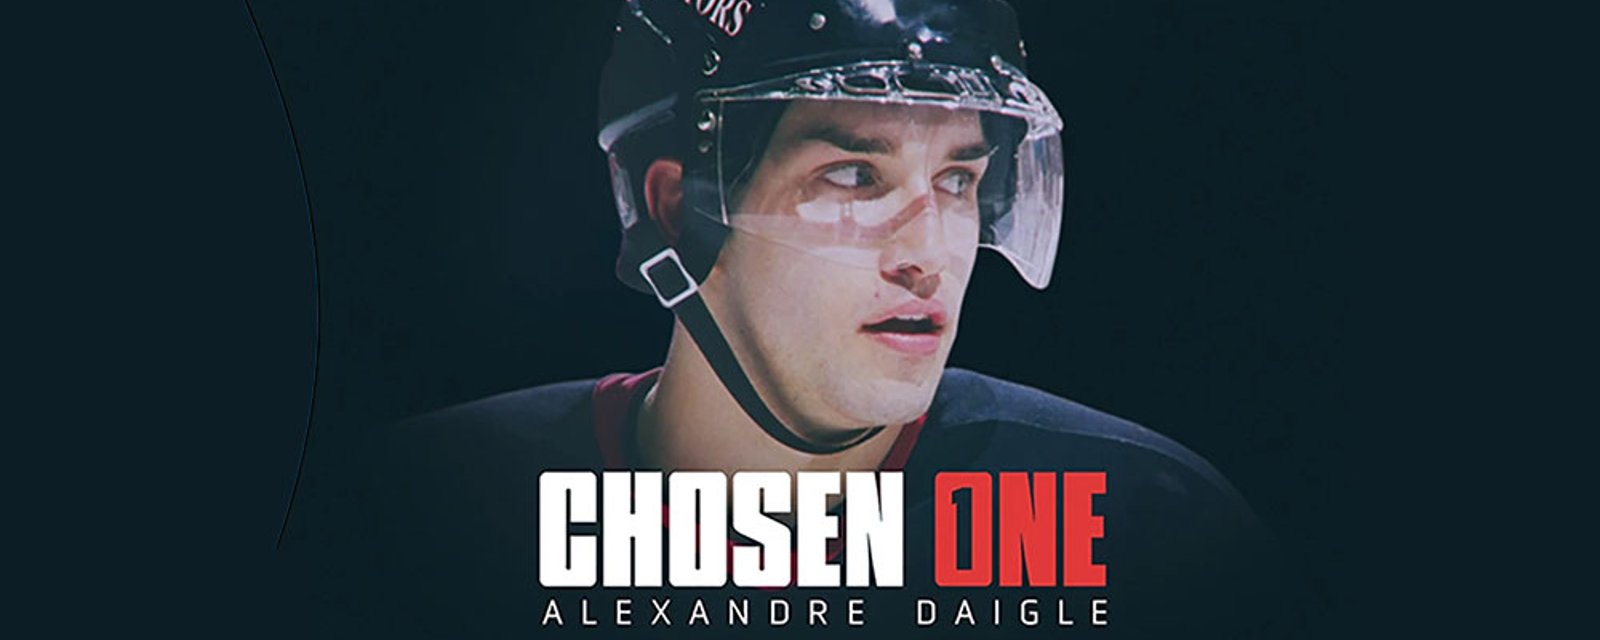 First look at ‘Chosen One: Alexandre Daigle’ documentary coming next month